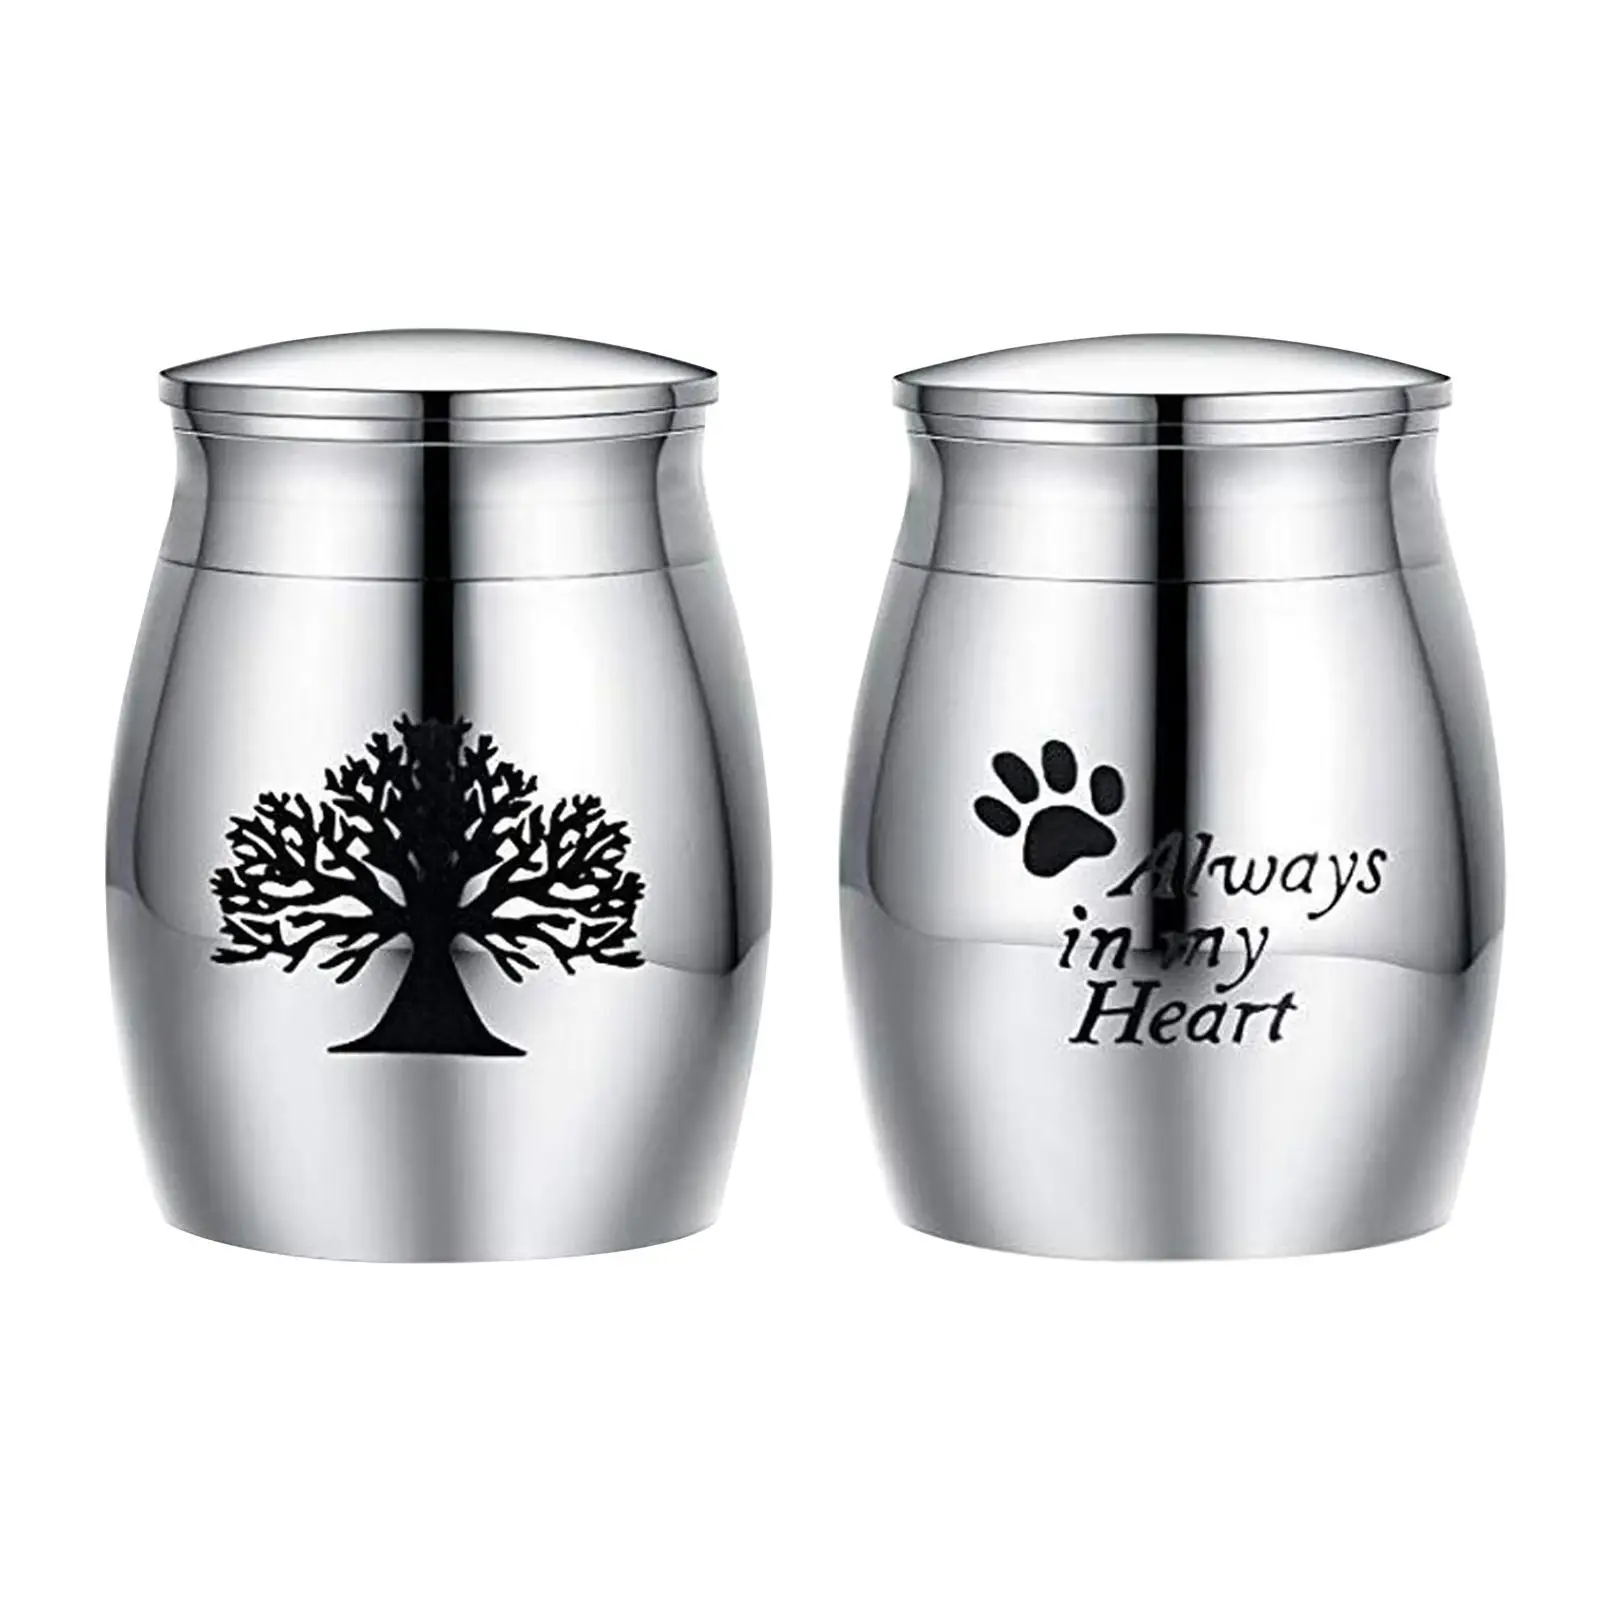 

Pet Urn Cinerary Casket Openable for Human Pet Ashes Final Comforting Resting Place Urn Box Storage Mini Cremation Memorial Urn